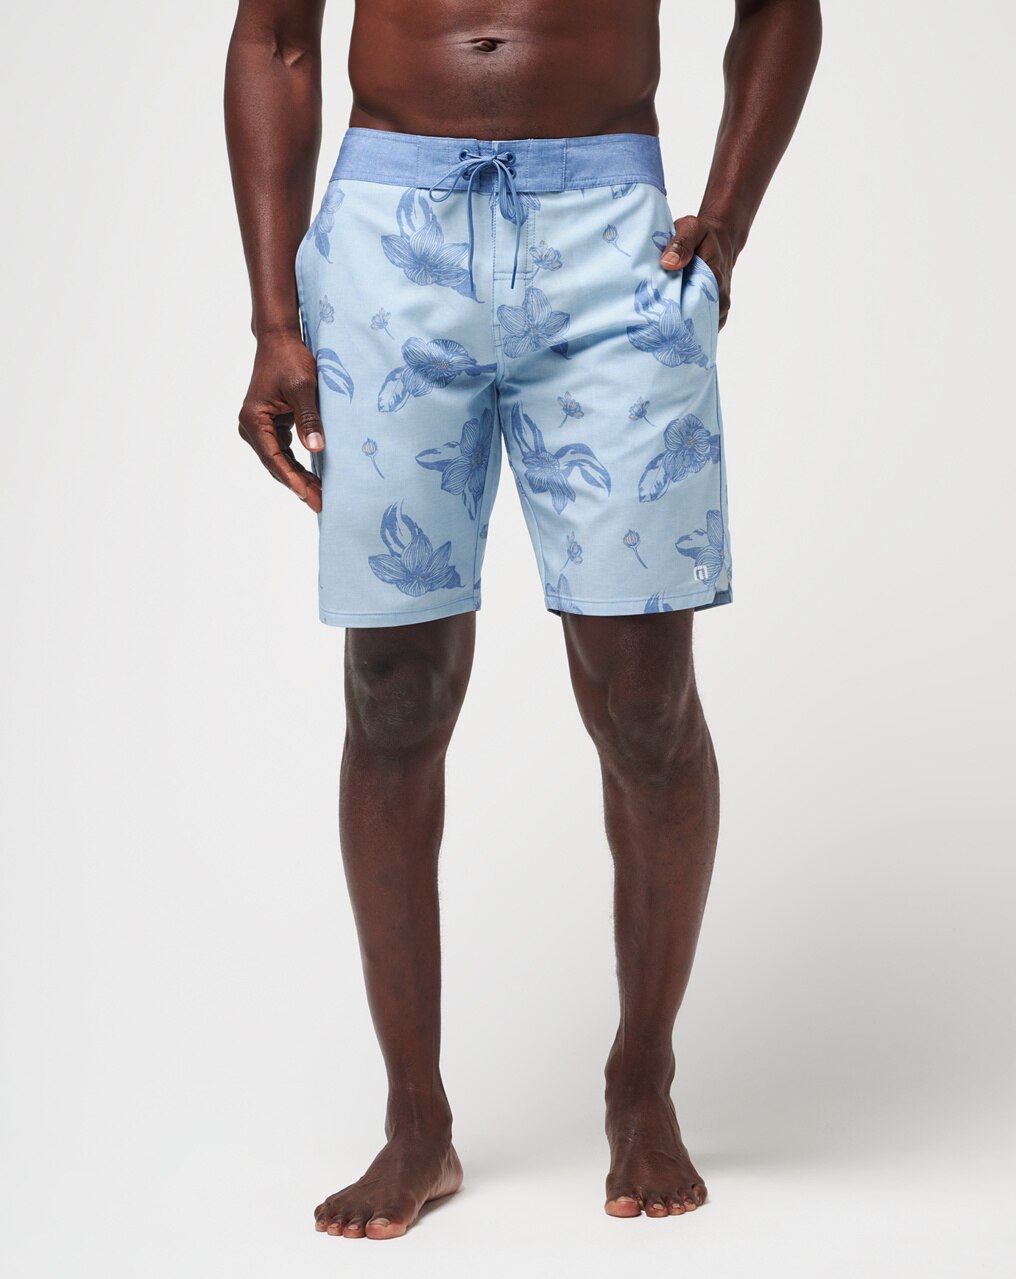 LULL IN THE ACTION BOARDSHORT 1